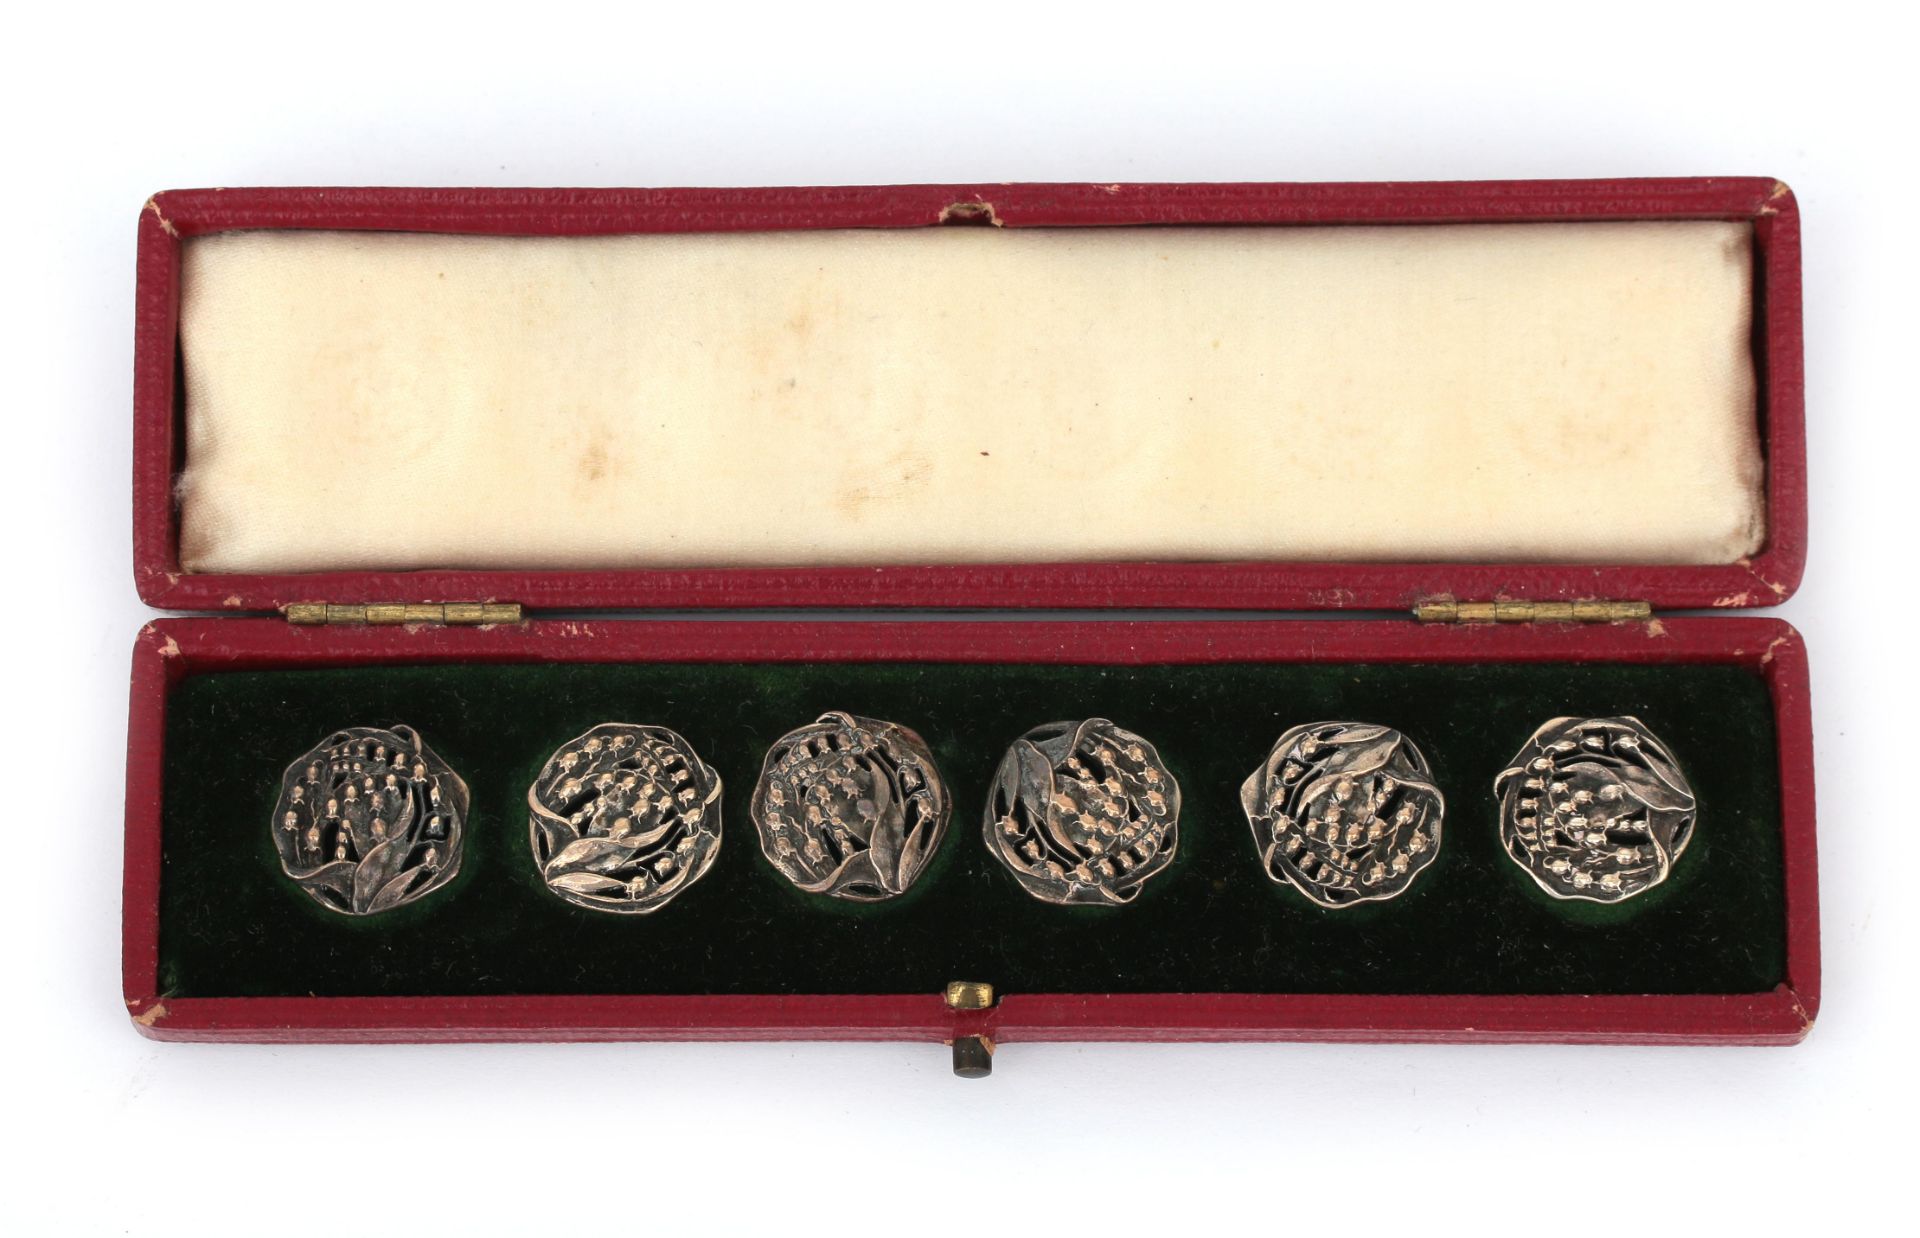 Six pierced silver modern style lily of the valley buttons in case, reg. nr. 394736, circa 1900.